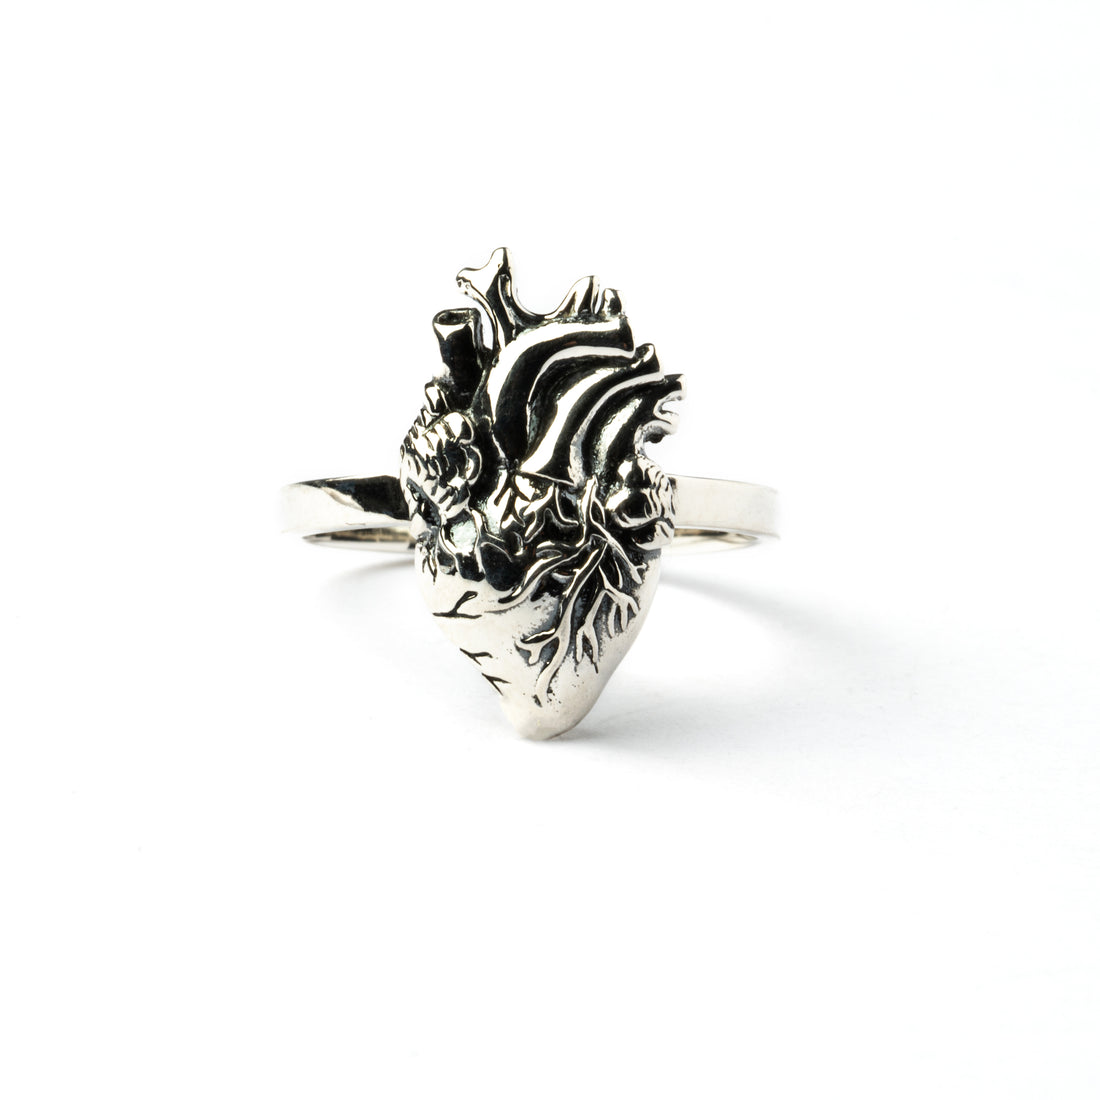 Silver Anatomic Heart Ring frontal view